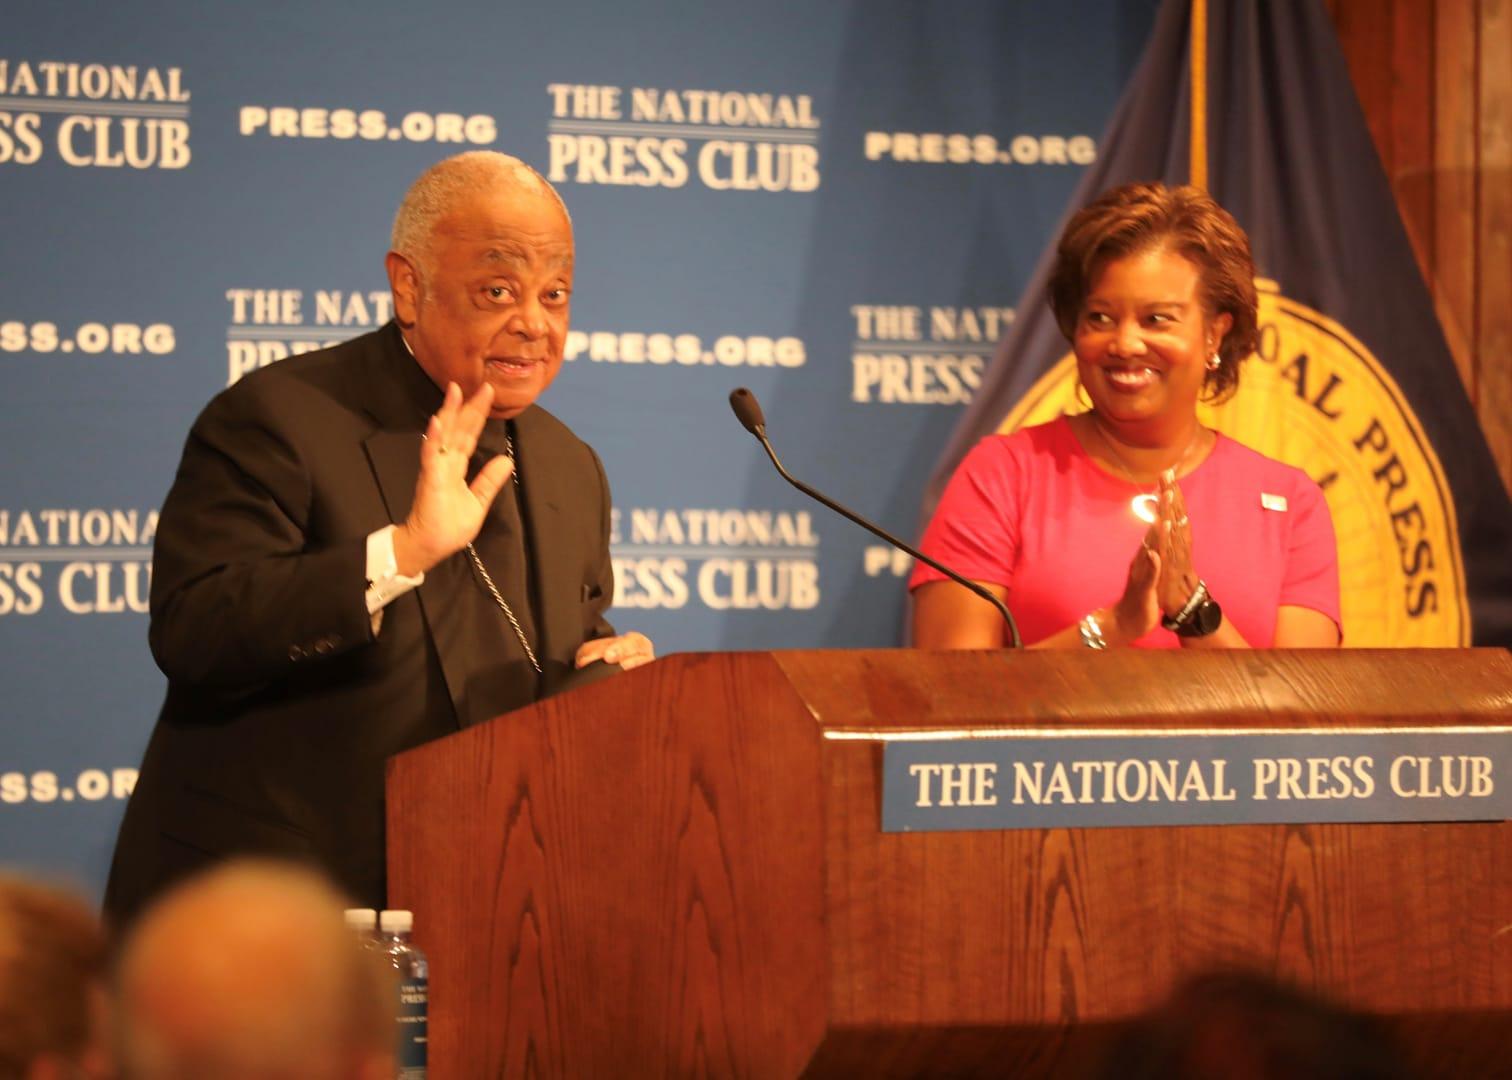 At National Press Club, Cardinal Gregory praises, challenges media